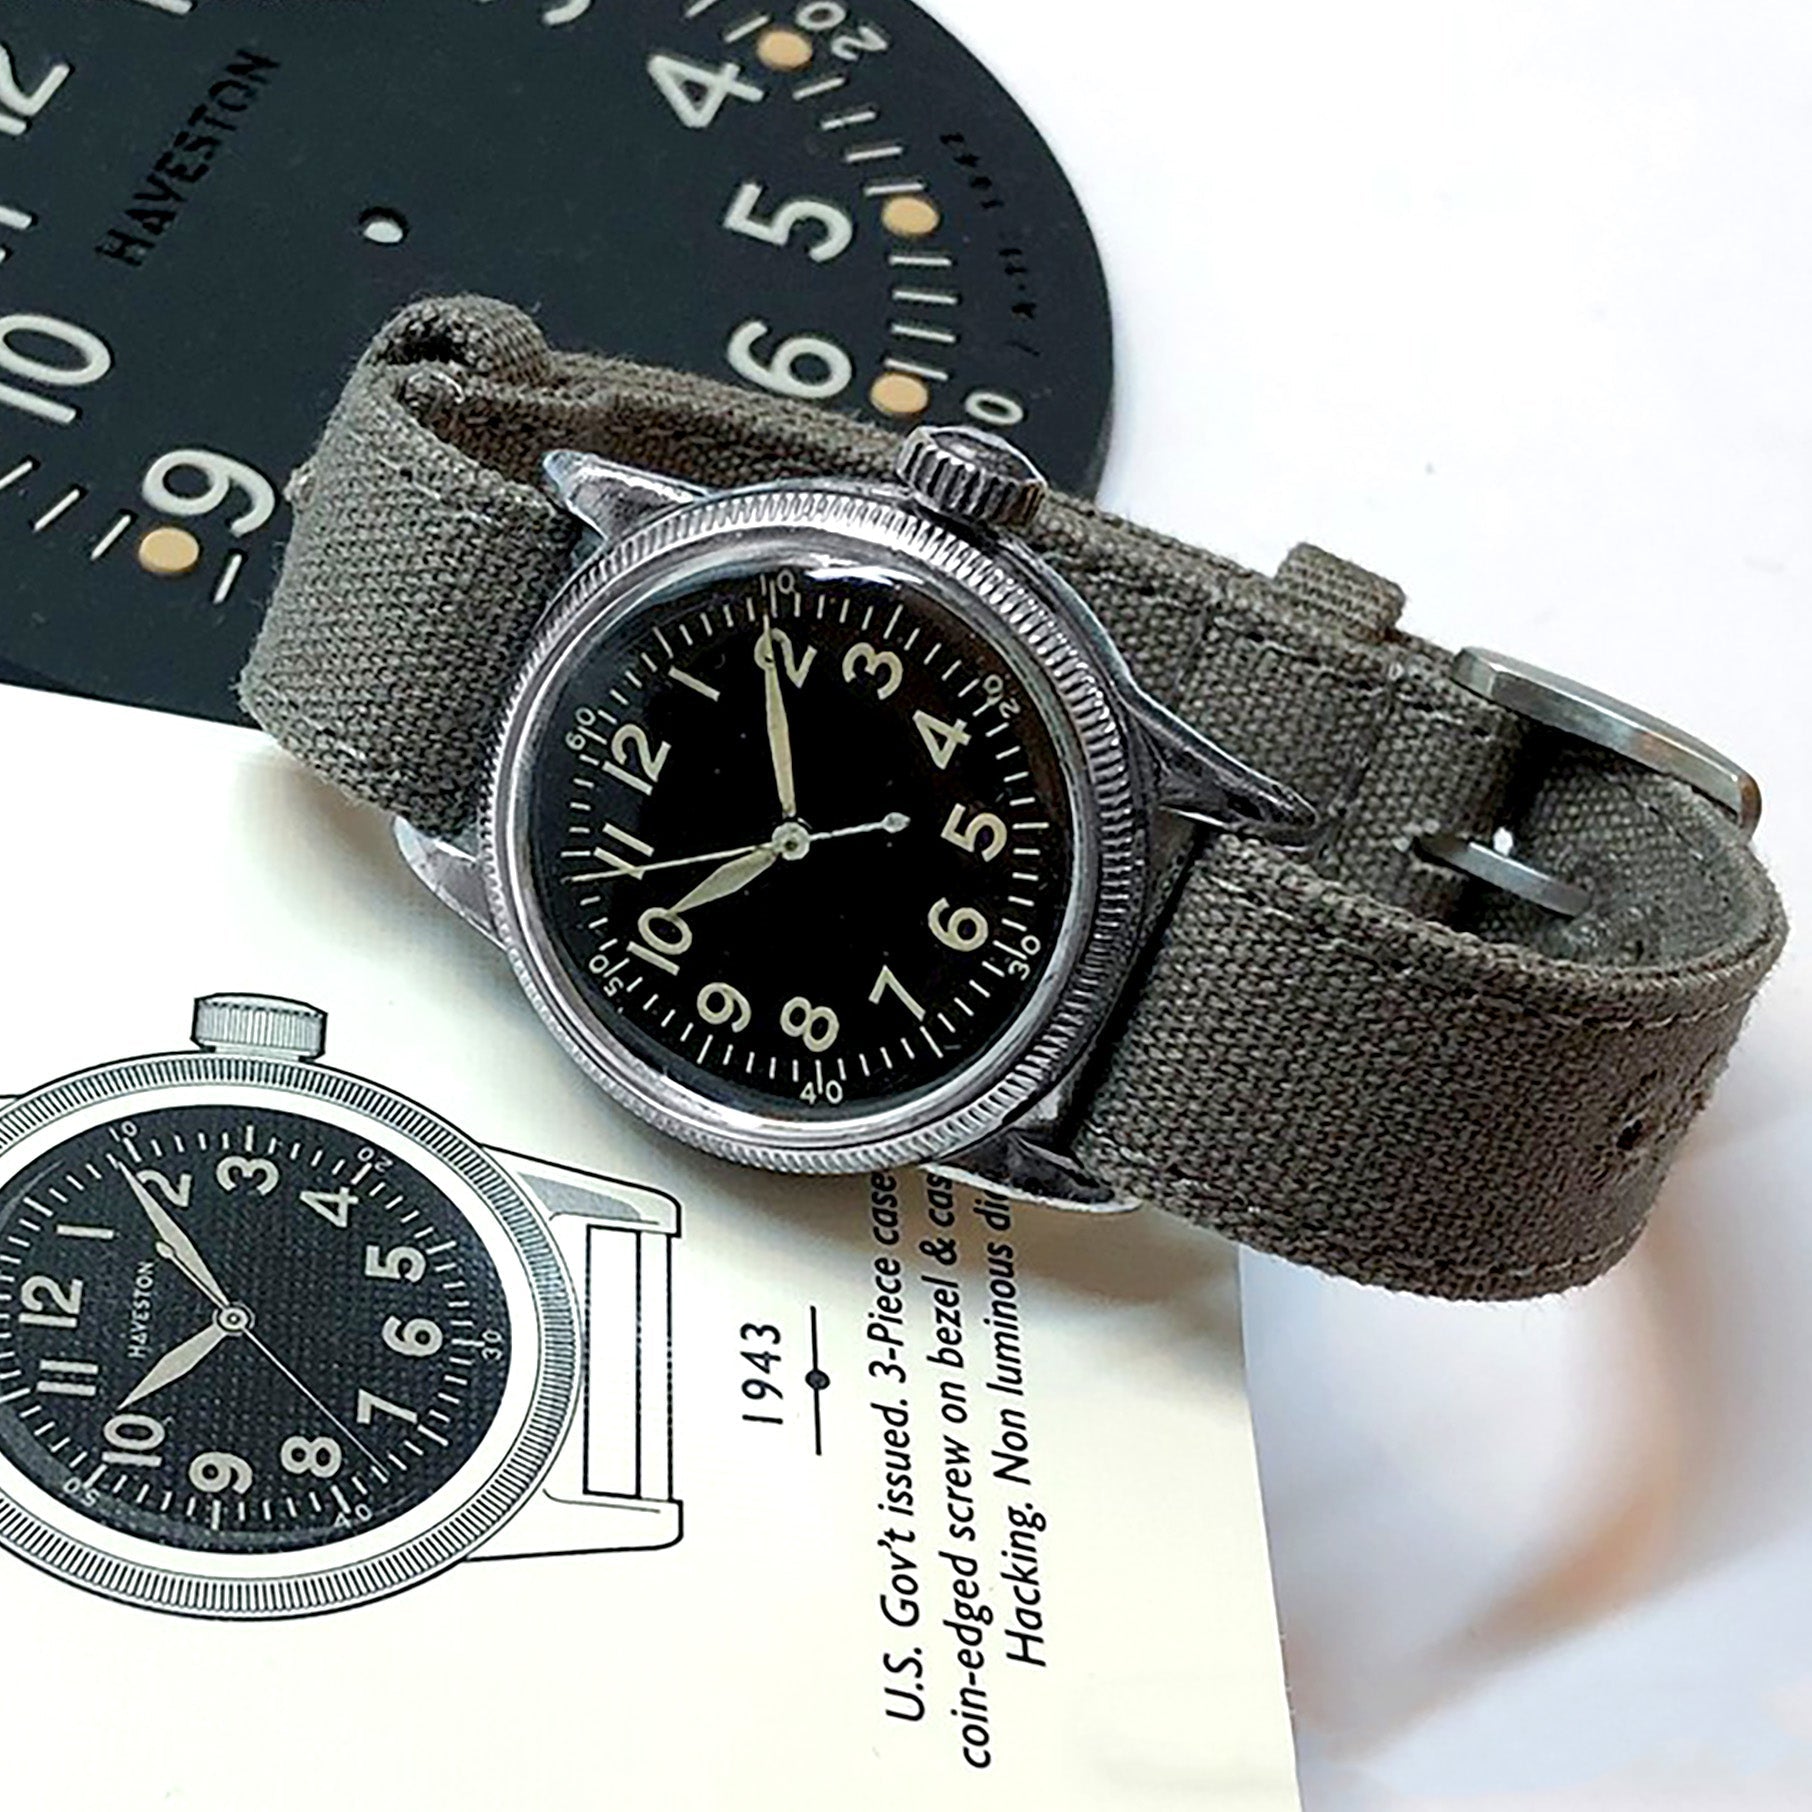 Grey Forecastle 16mm Canvas NATO Watch Strap by HAVESTON Straps, Brushed Strapcode Watch Bands